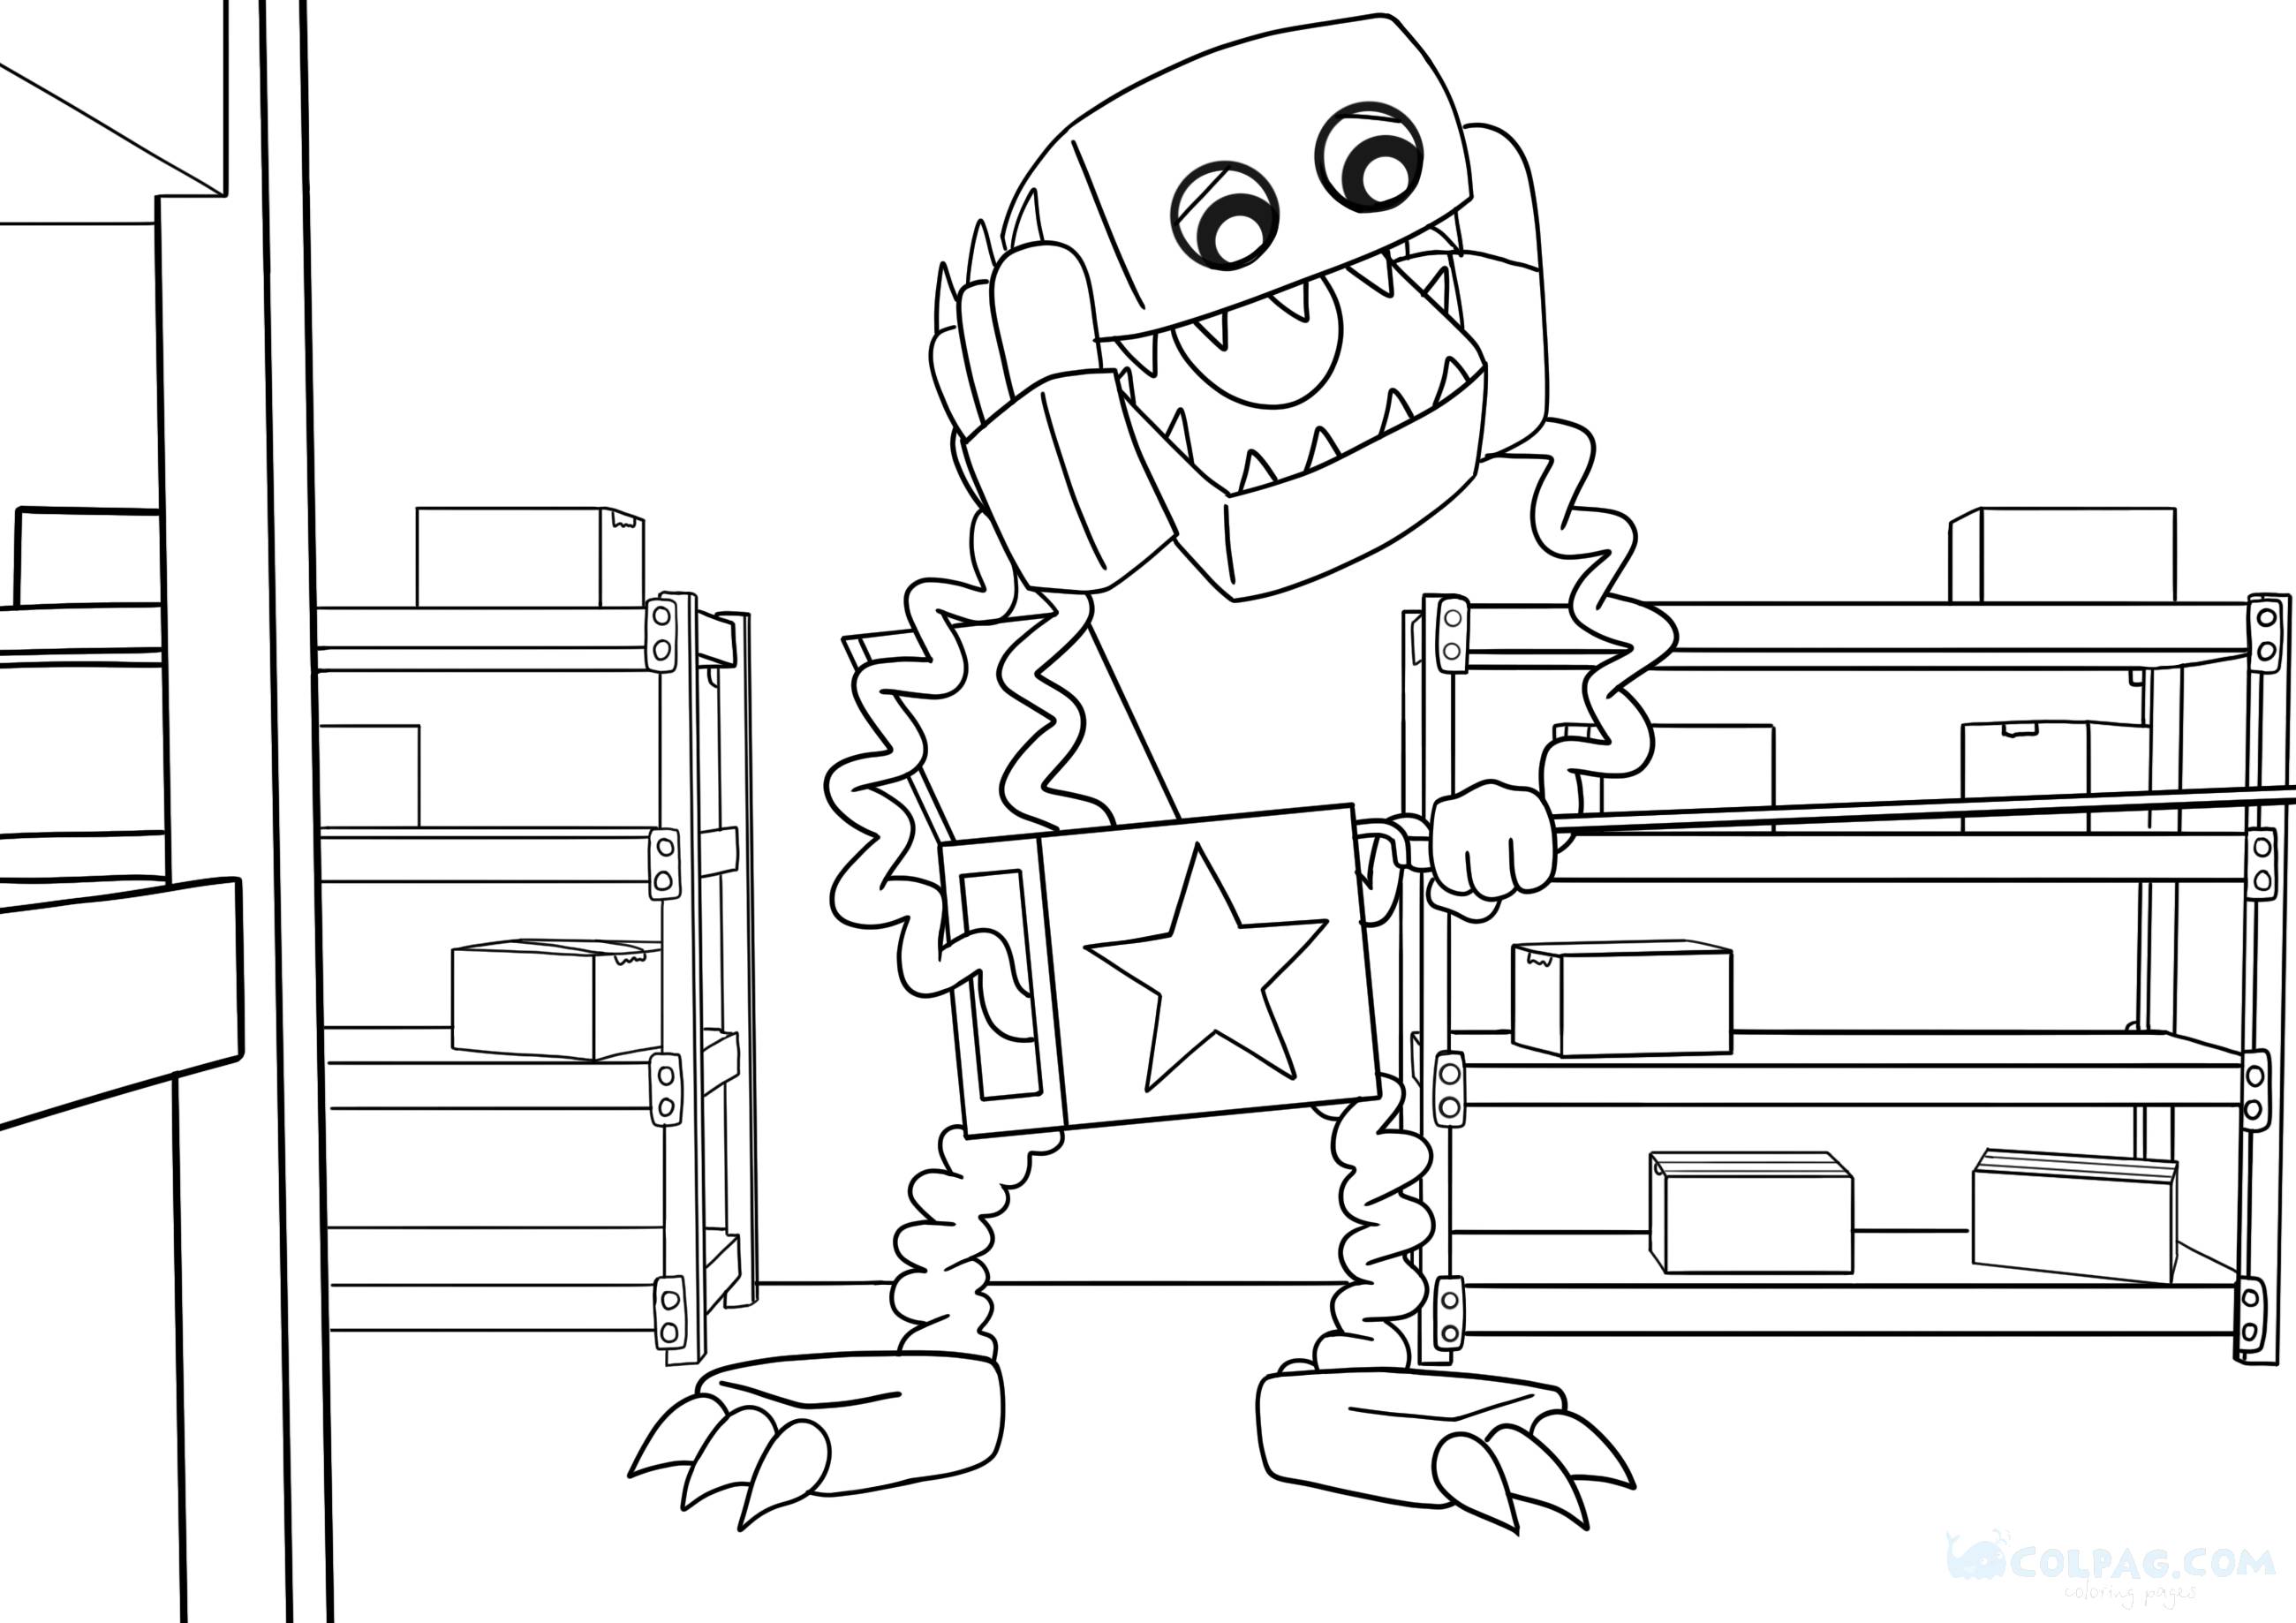 boxy-boo-project-playtime-coloring-page-colpag-com-6